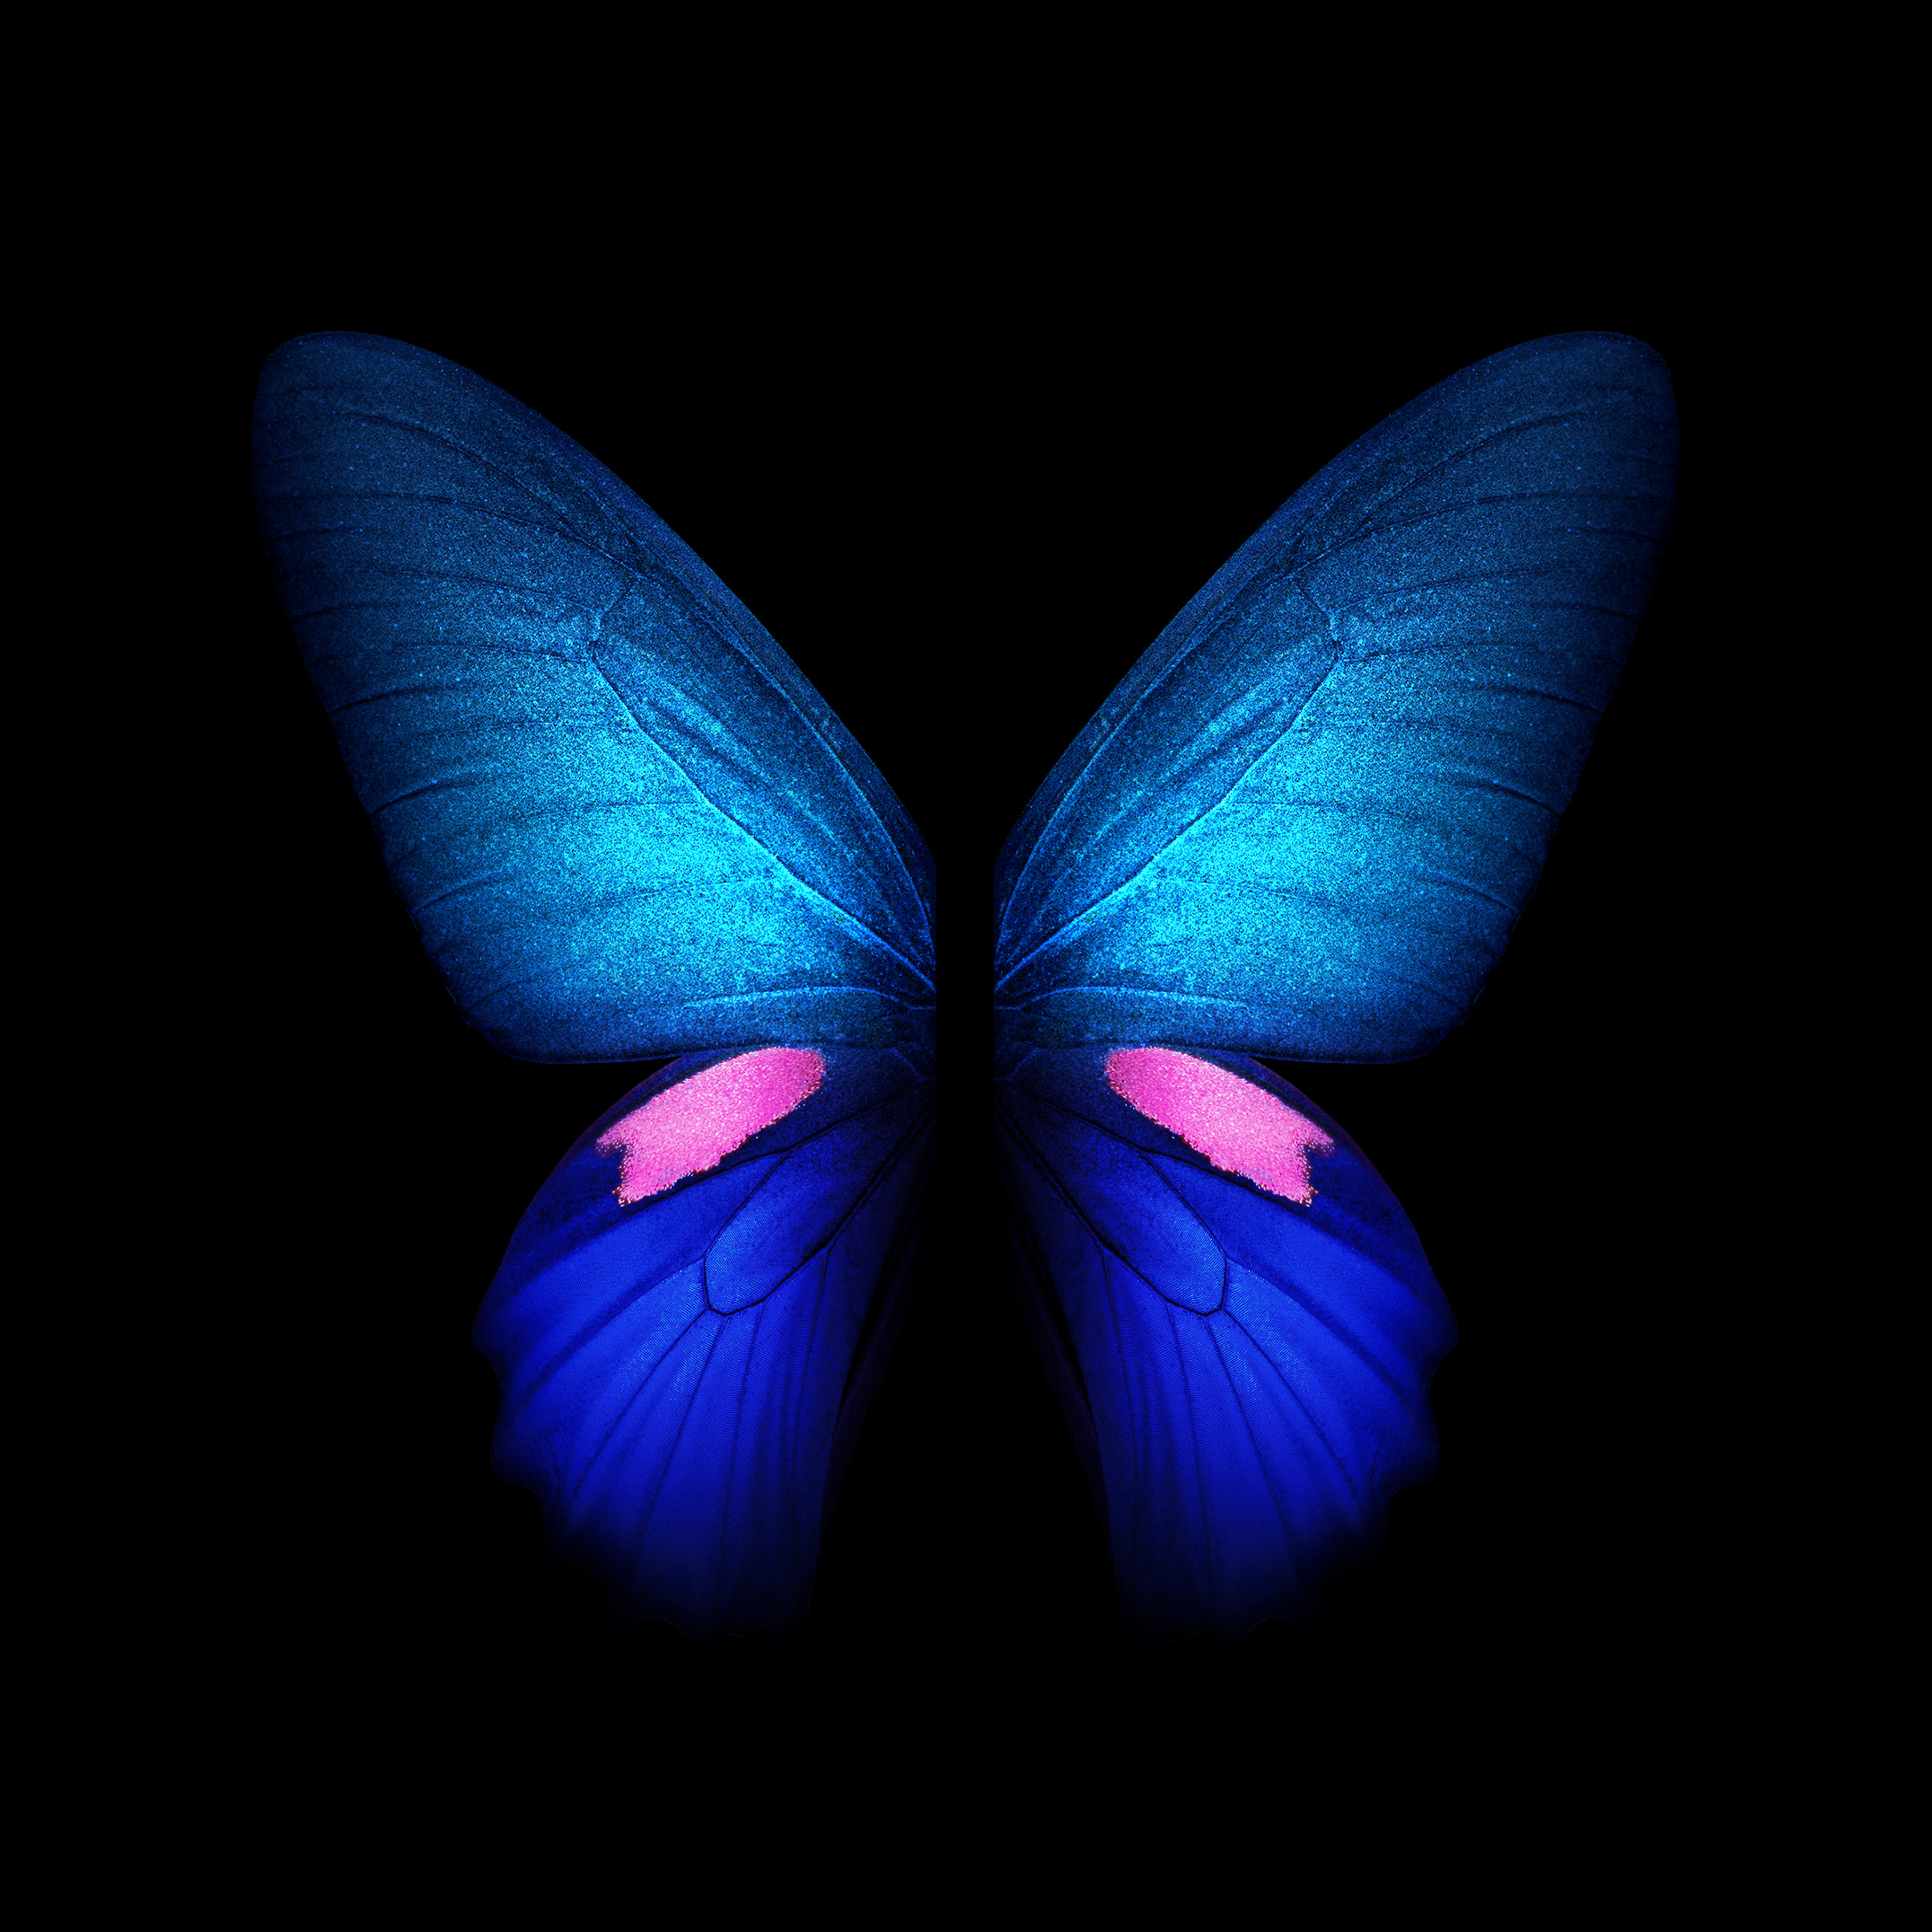 2152x2152 Samsung Galaxy Fold butterfly wallpaper in blue with two wings.